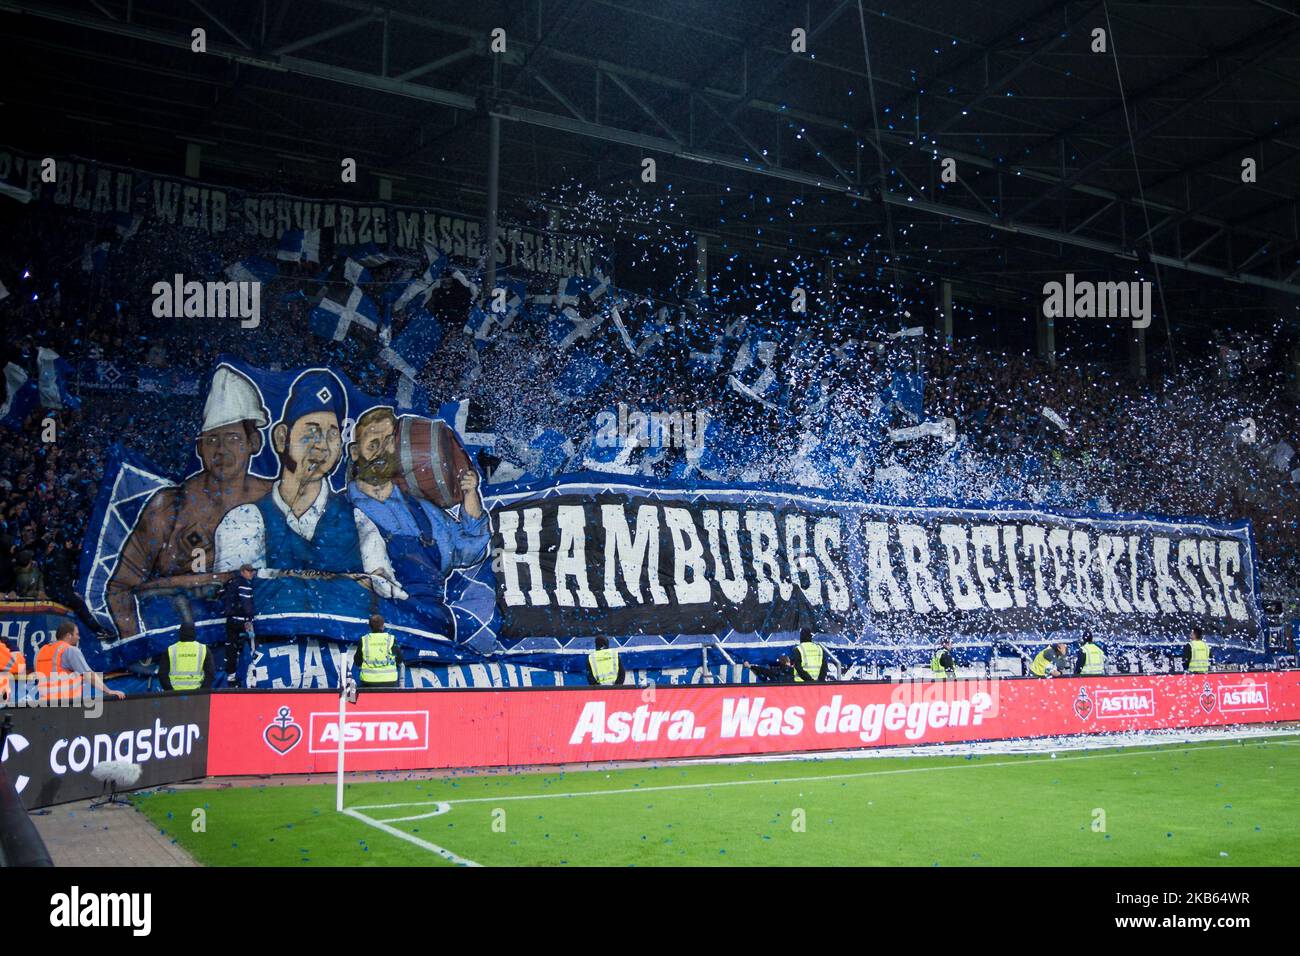 Fans hamburger sv support team hi-res stock photography and images - Alamy